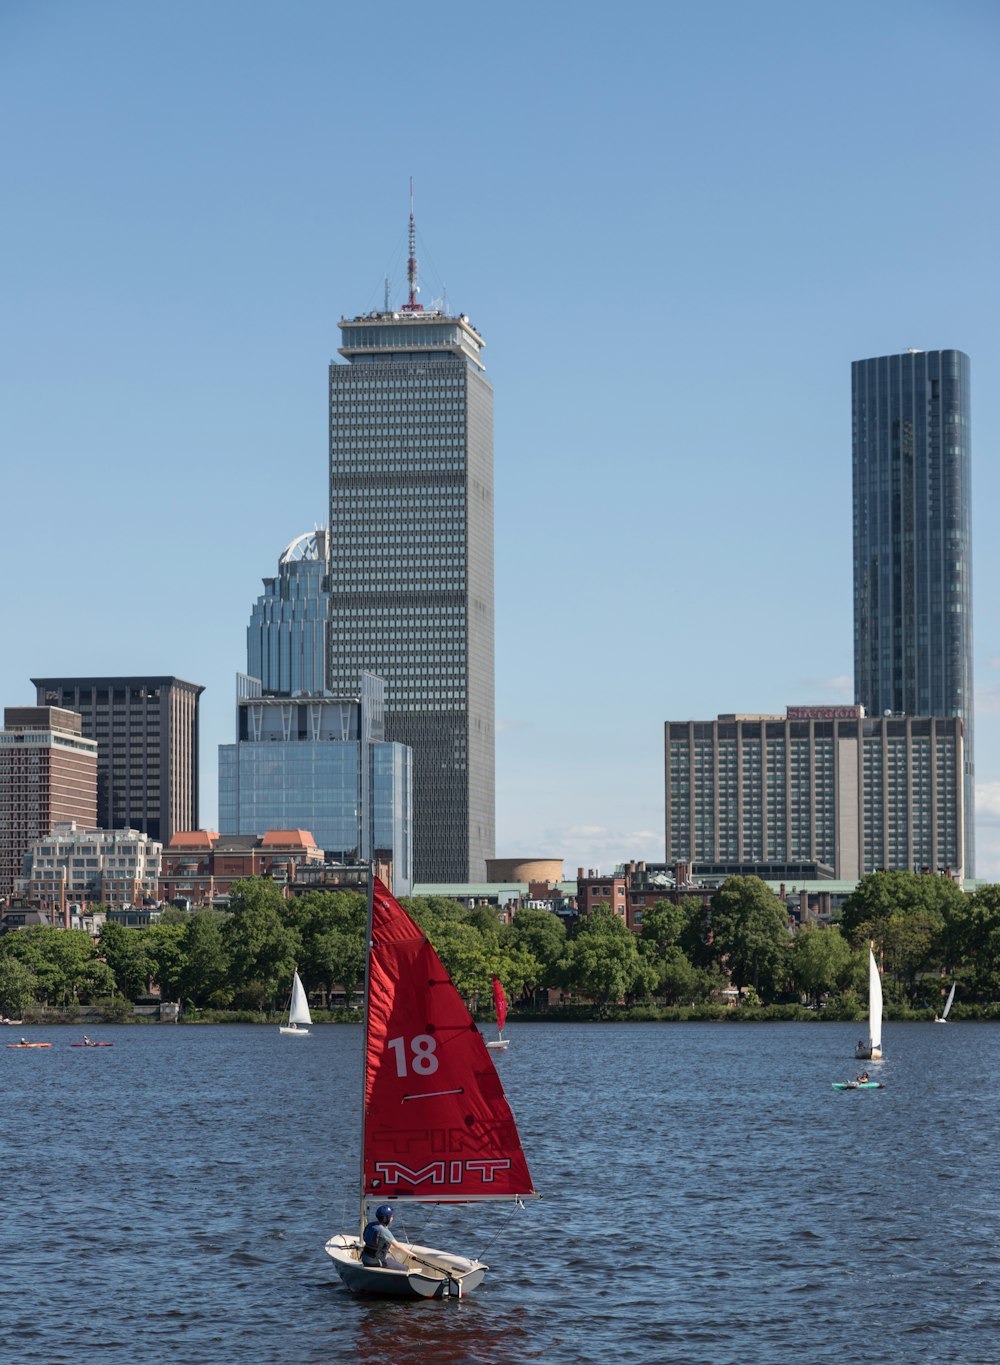 a group of sailboats on the water with Prudential Tower in the background